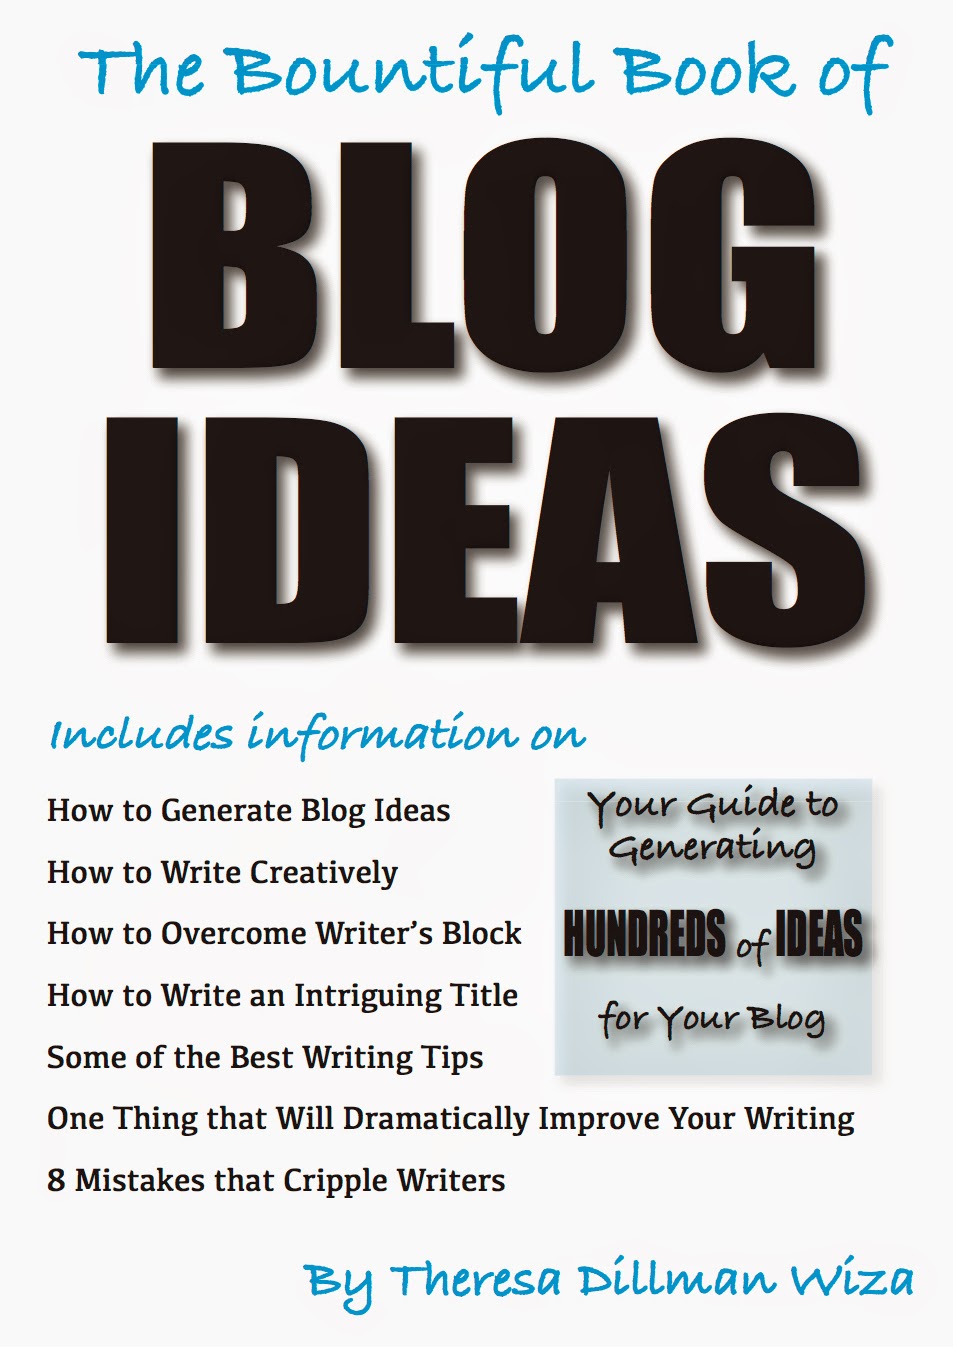 Need Ideas for YOUR Blog?